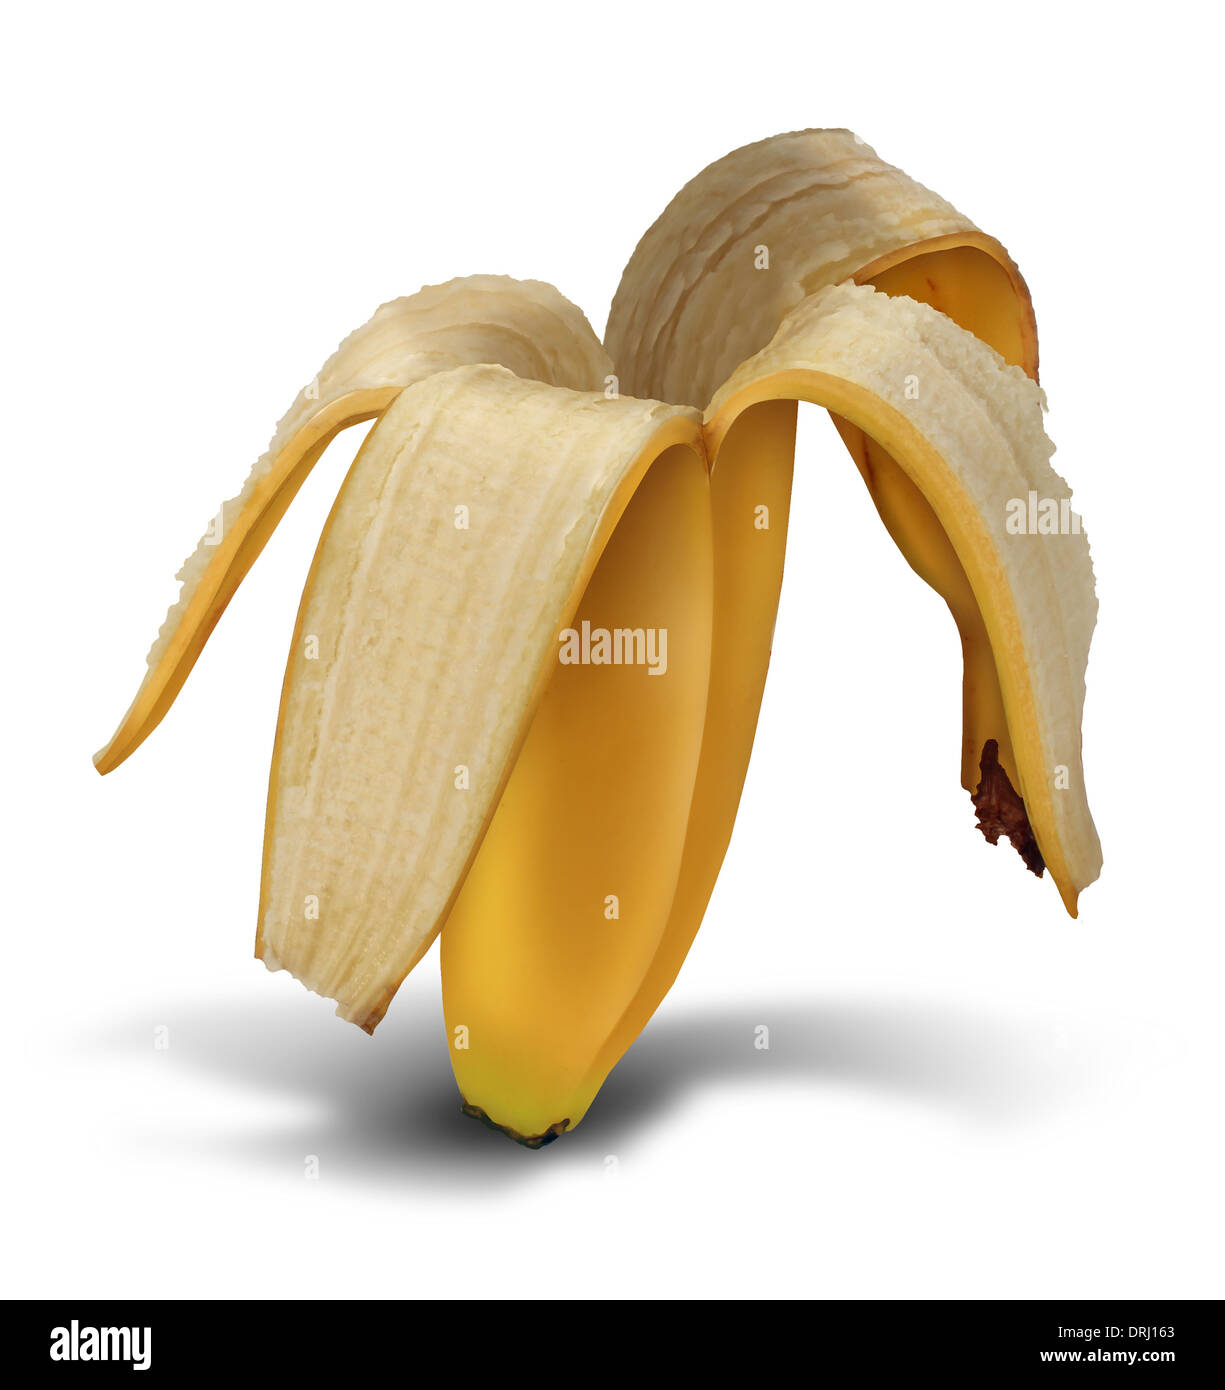 Bankrupt symbol as a business symbol of debt and overspending financial crisis as an empty banana peel as a metaphor for loss and financial streess on a white background. Stock Photo